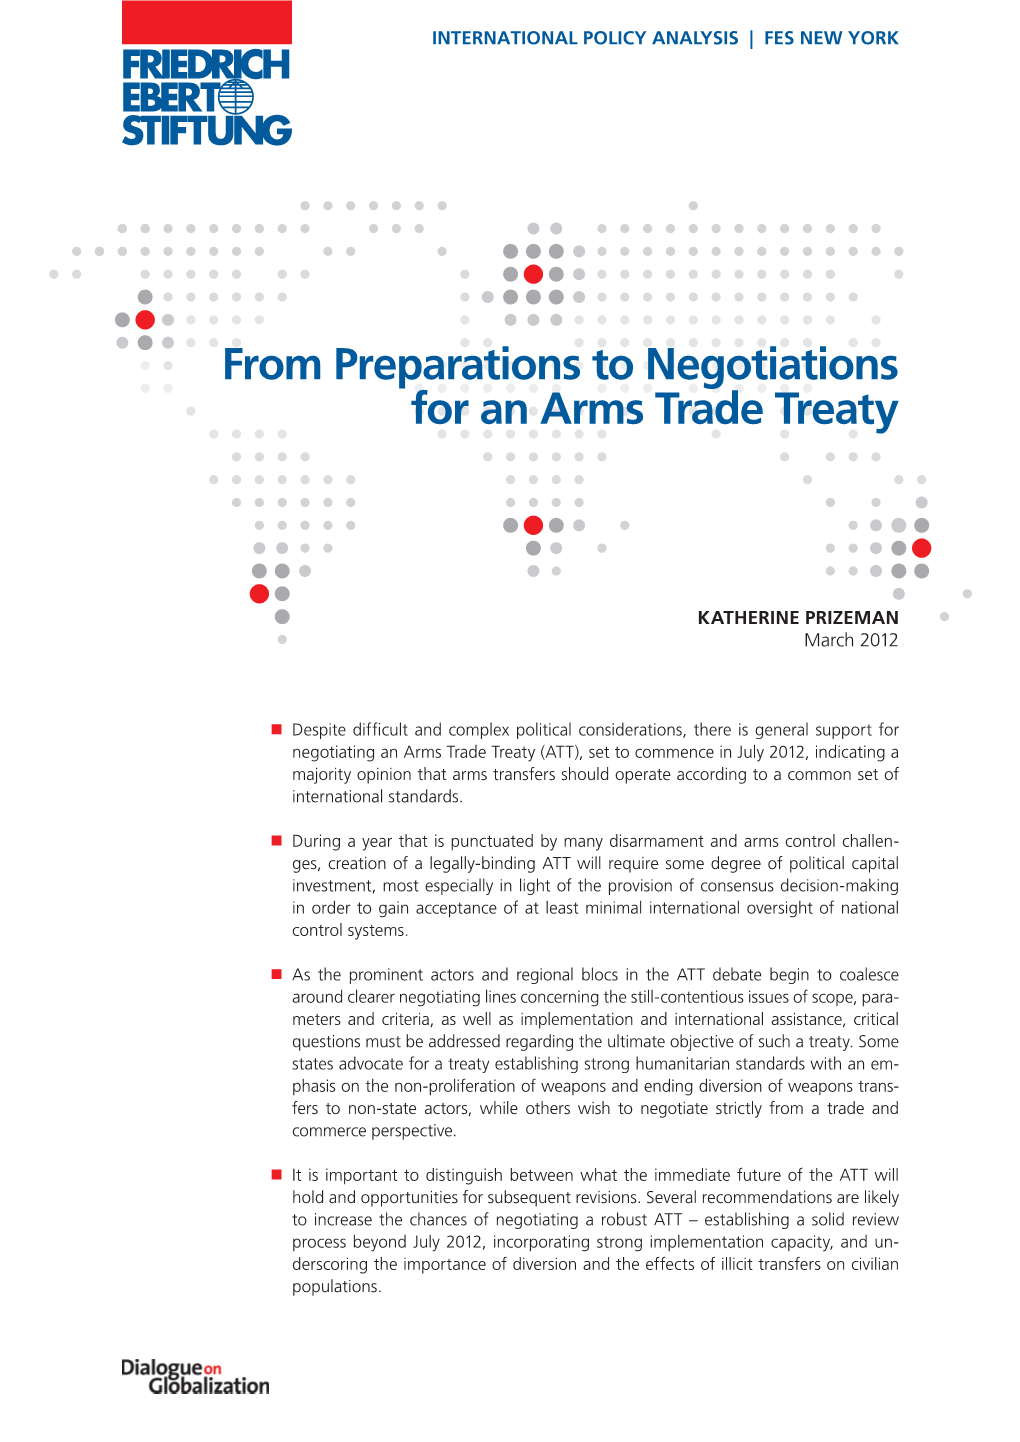 From Preparations to Negotiations for an Arms Trade Treaty